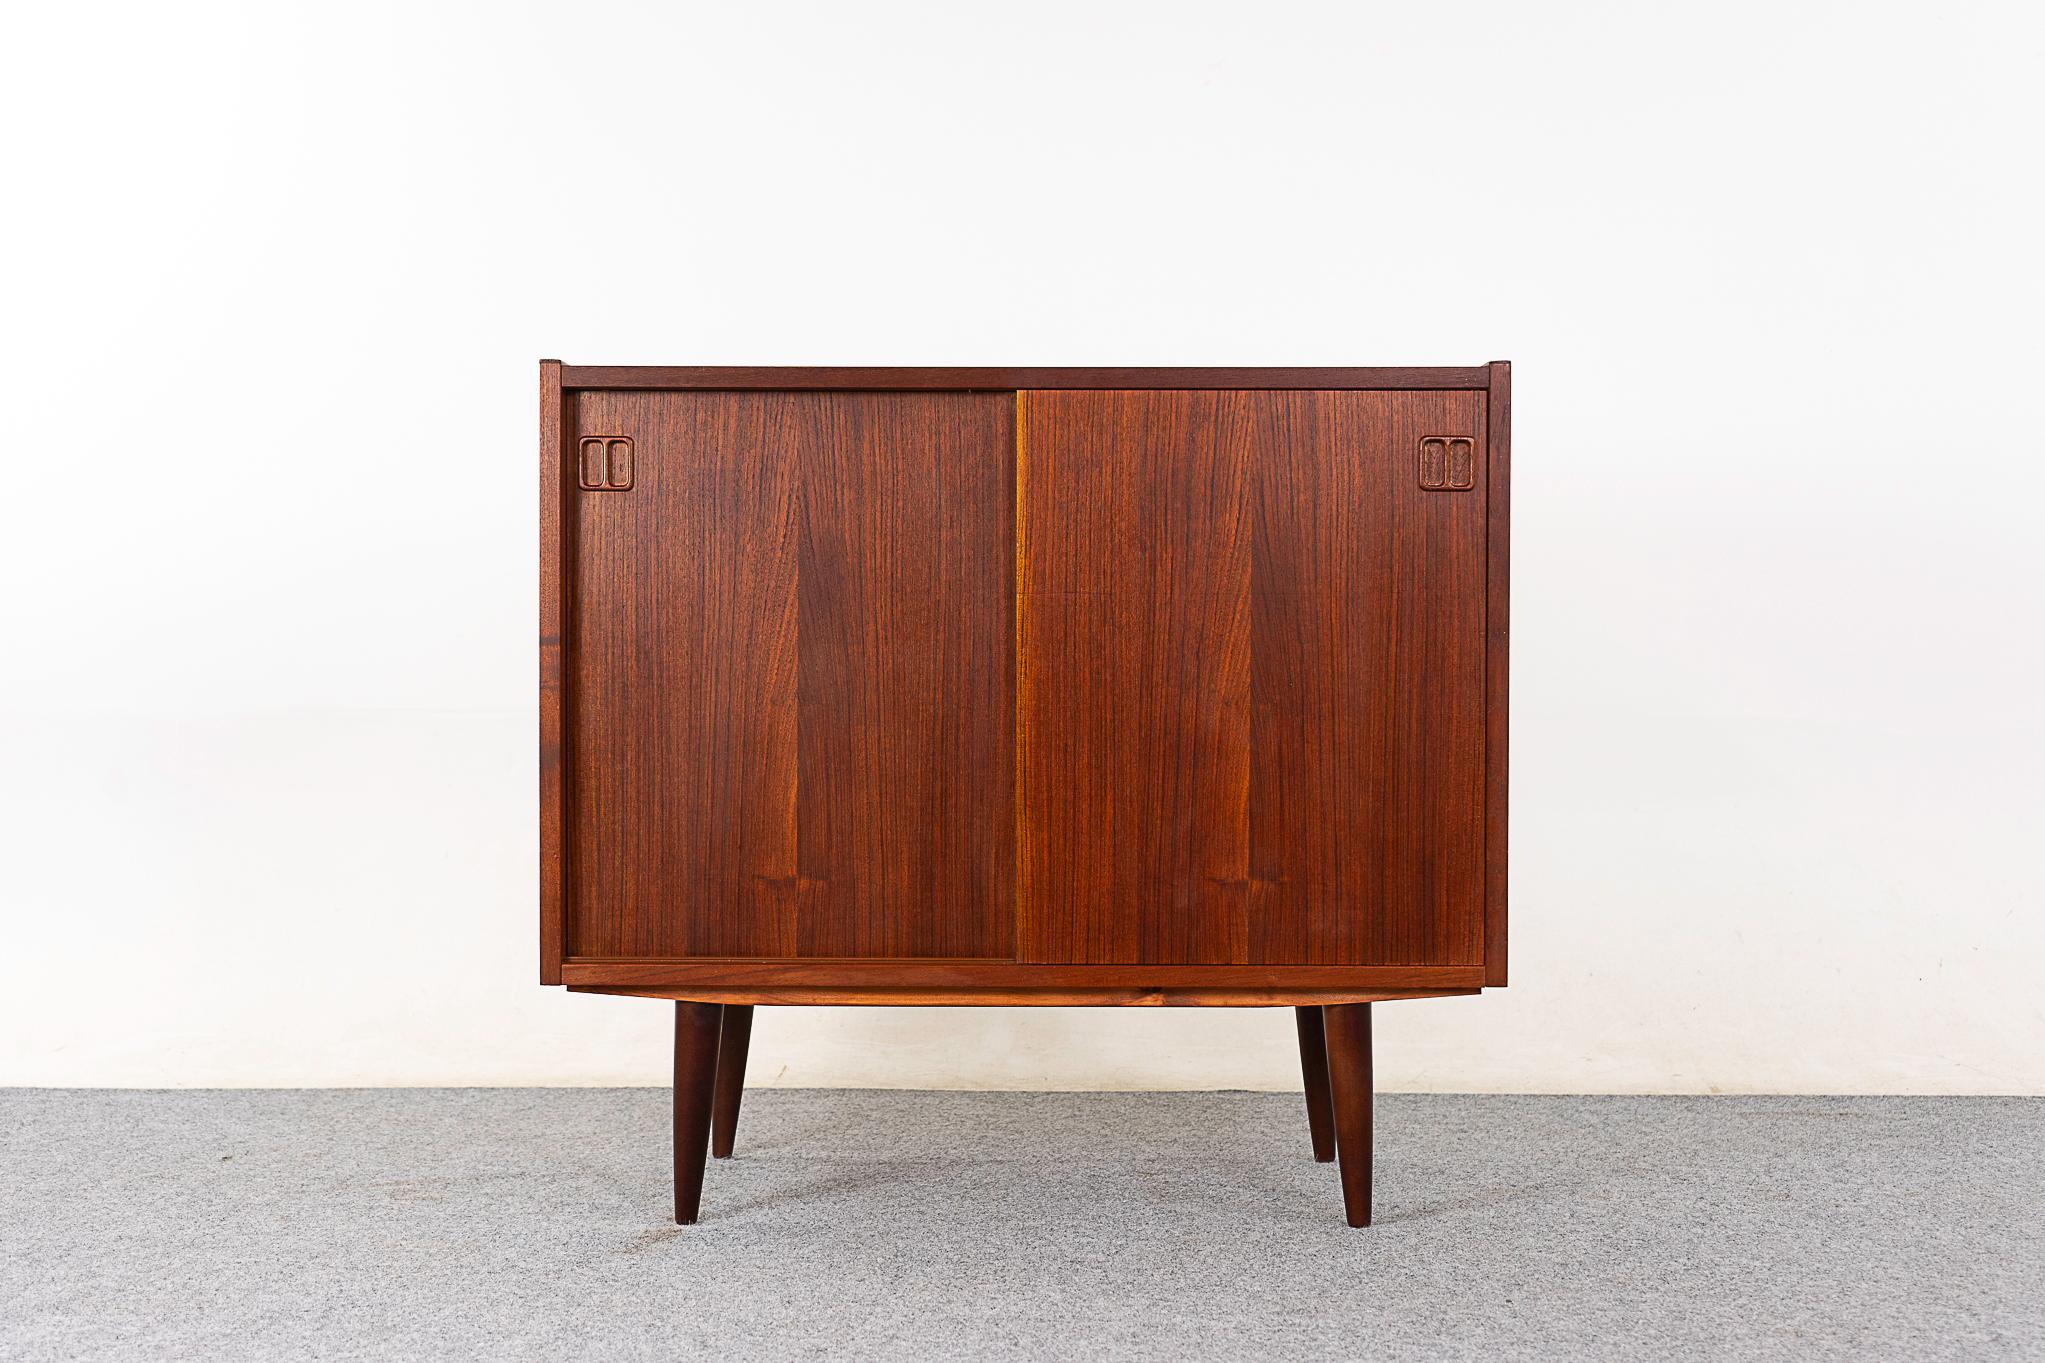 Teak Danish cabinet, circa 1960's. Clean, simple lined design highlights the exceptional book-matched veneer throughout. Height adjustable shelf. Minor veneer damage on side. 

Unrestored item with option to purchase in restored condition.